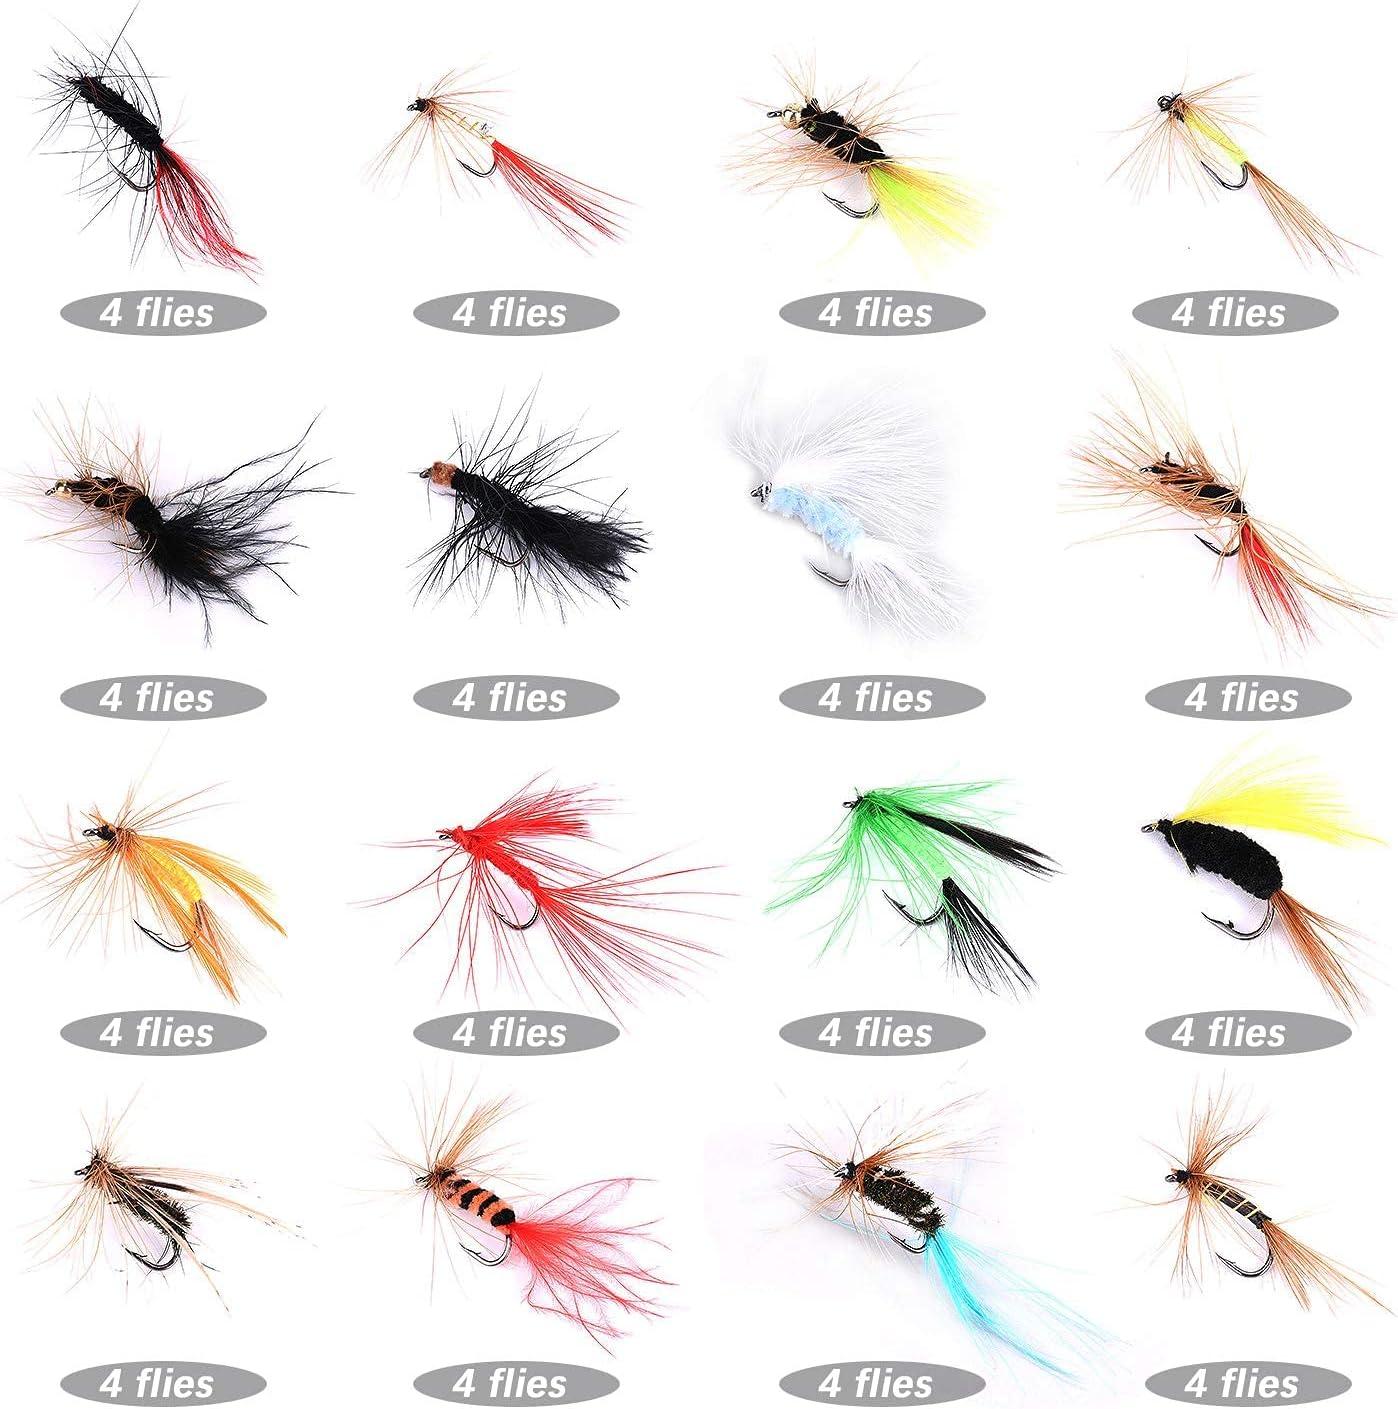 Fly Fishing Flies Kit with Box, Dry Wet Flies, Nymphs, Streamers